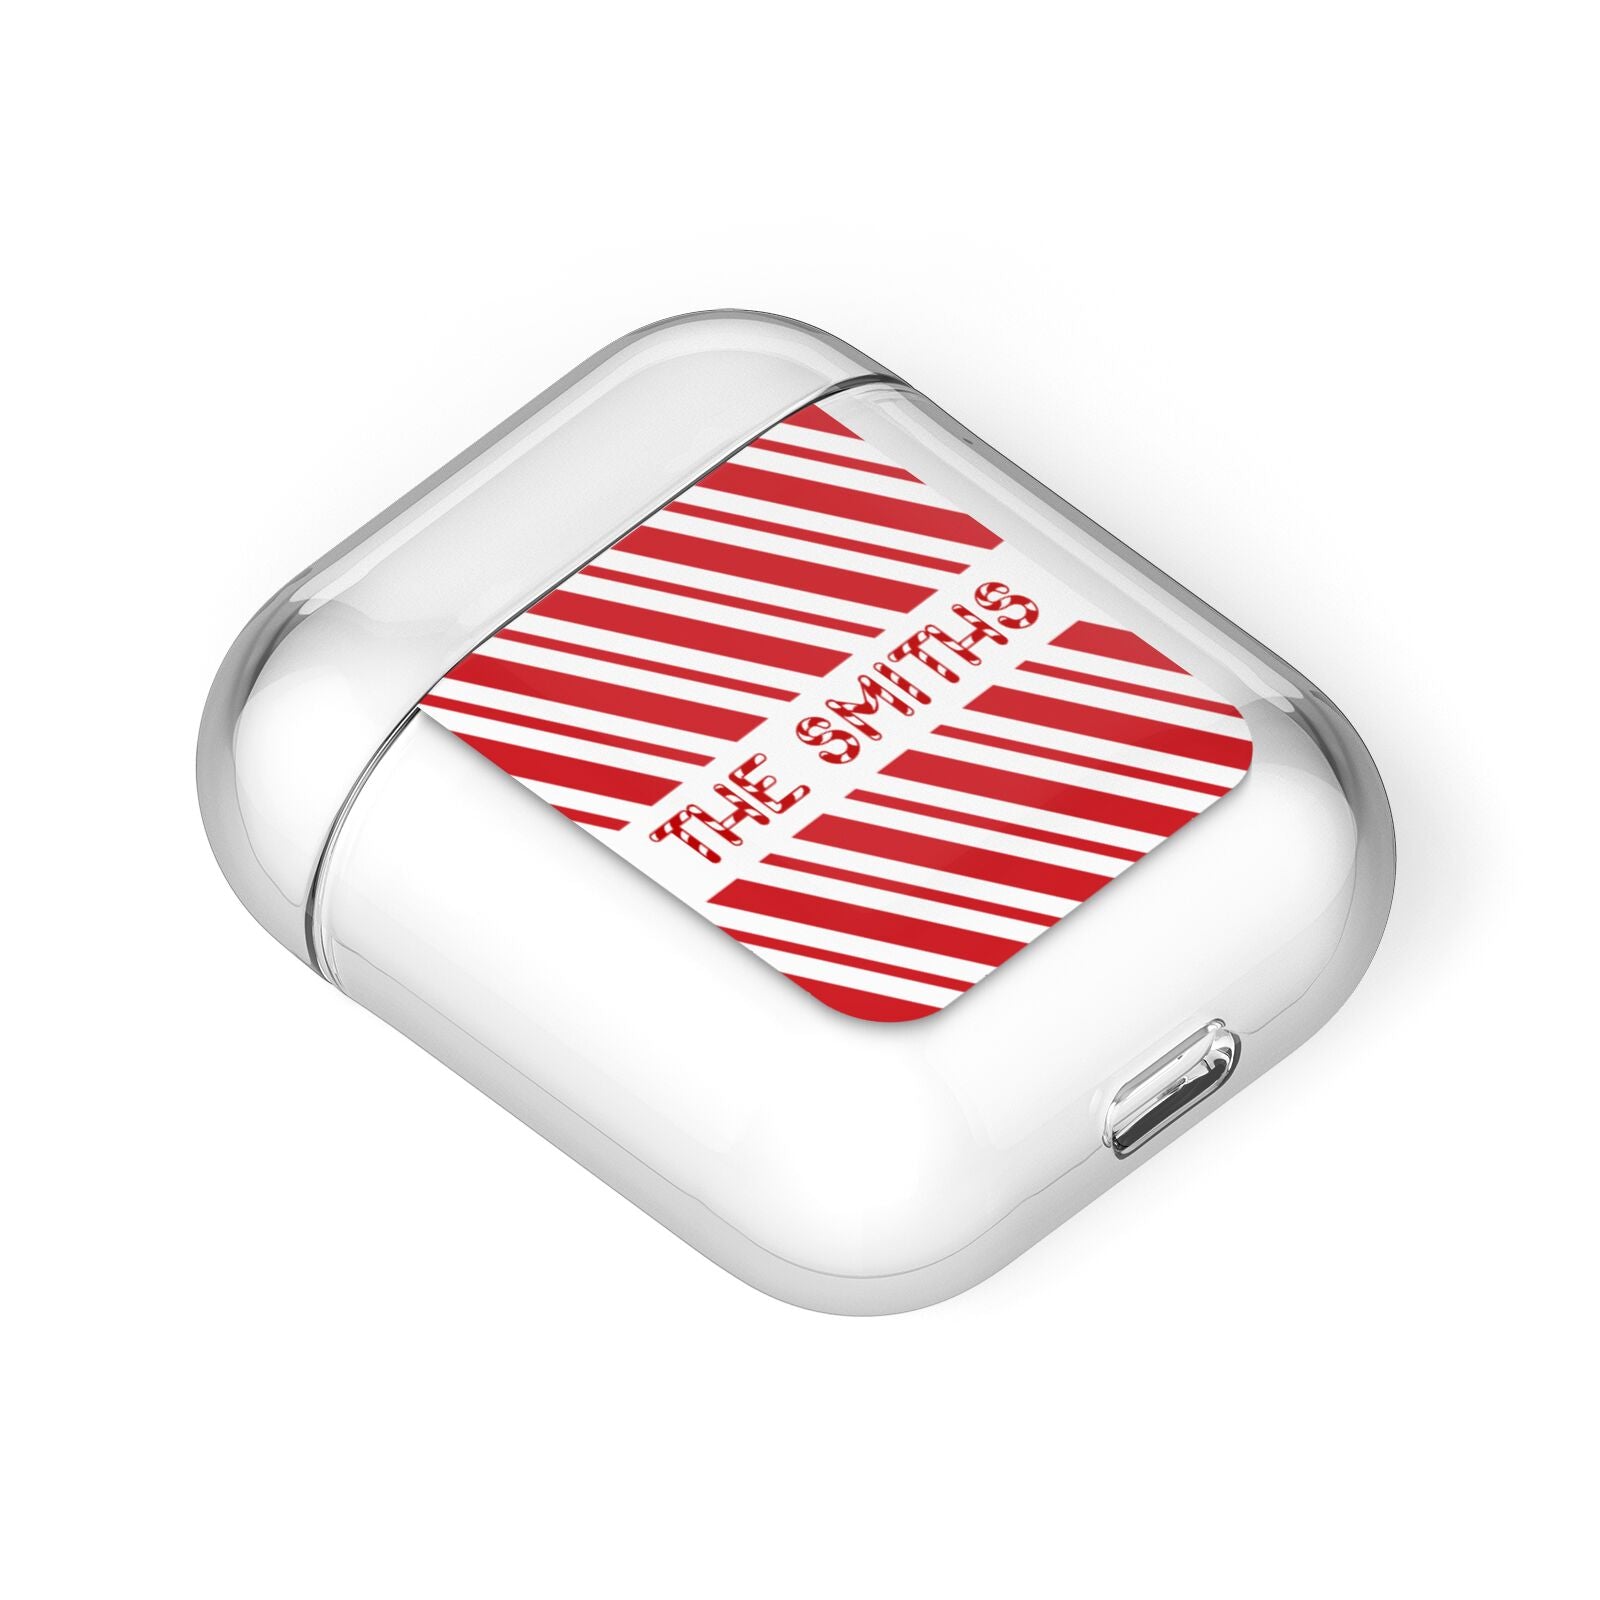 Candy Cane Personalised AirPods Case Laid Flat